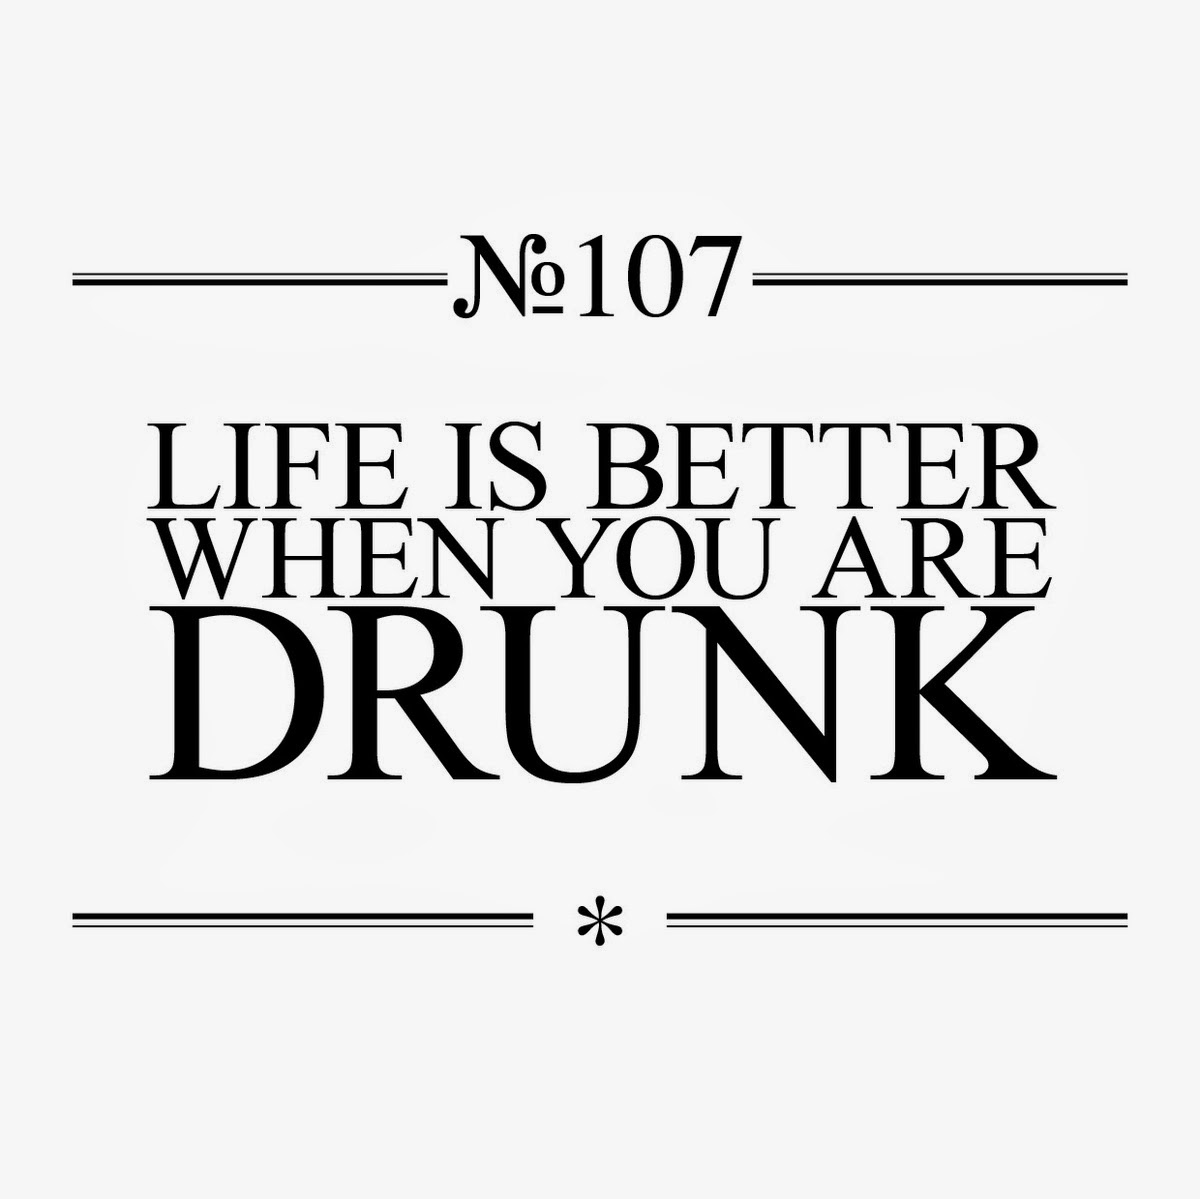 Funny Drinking Alcohol Quotes. QuotesGram